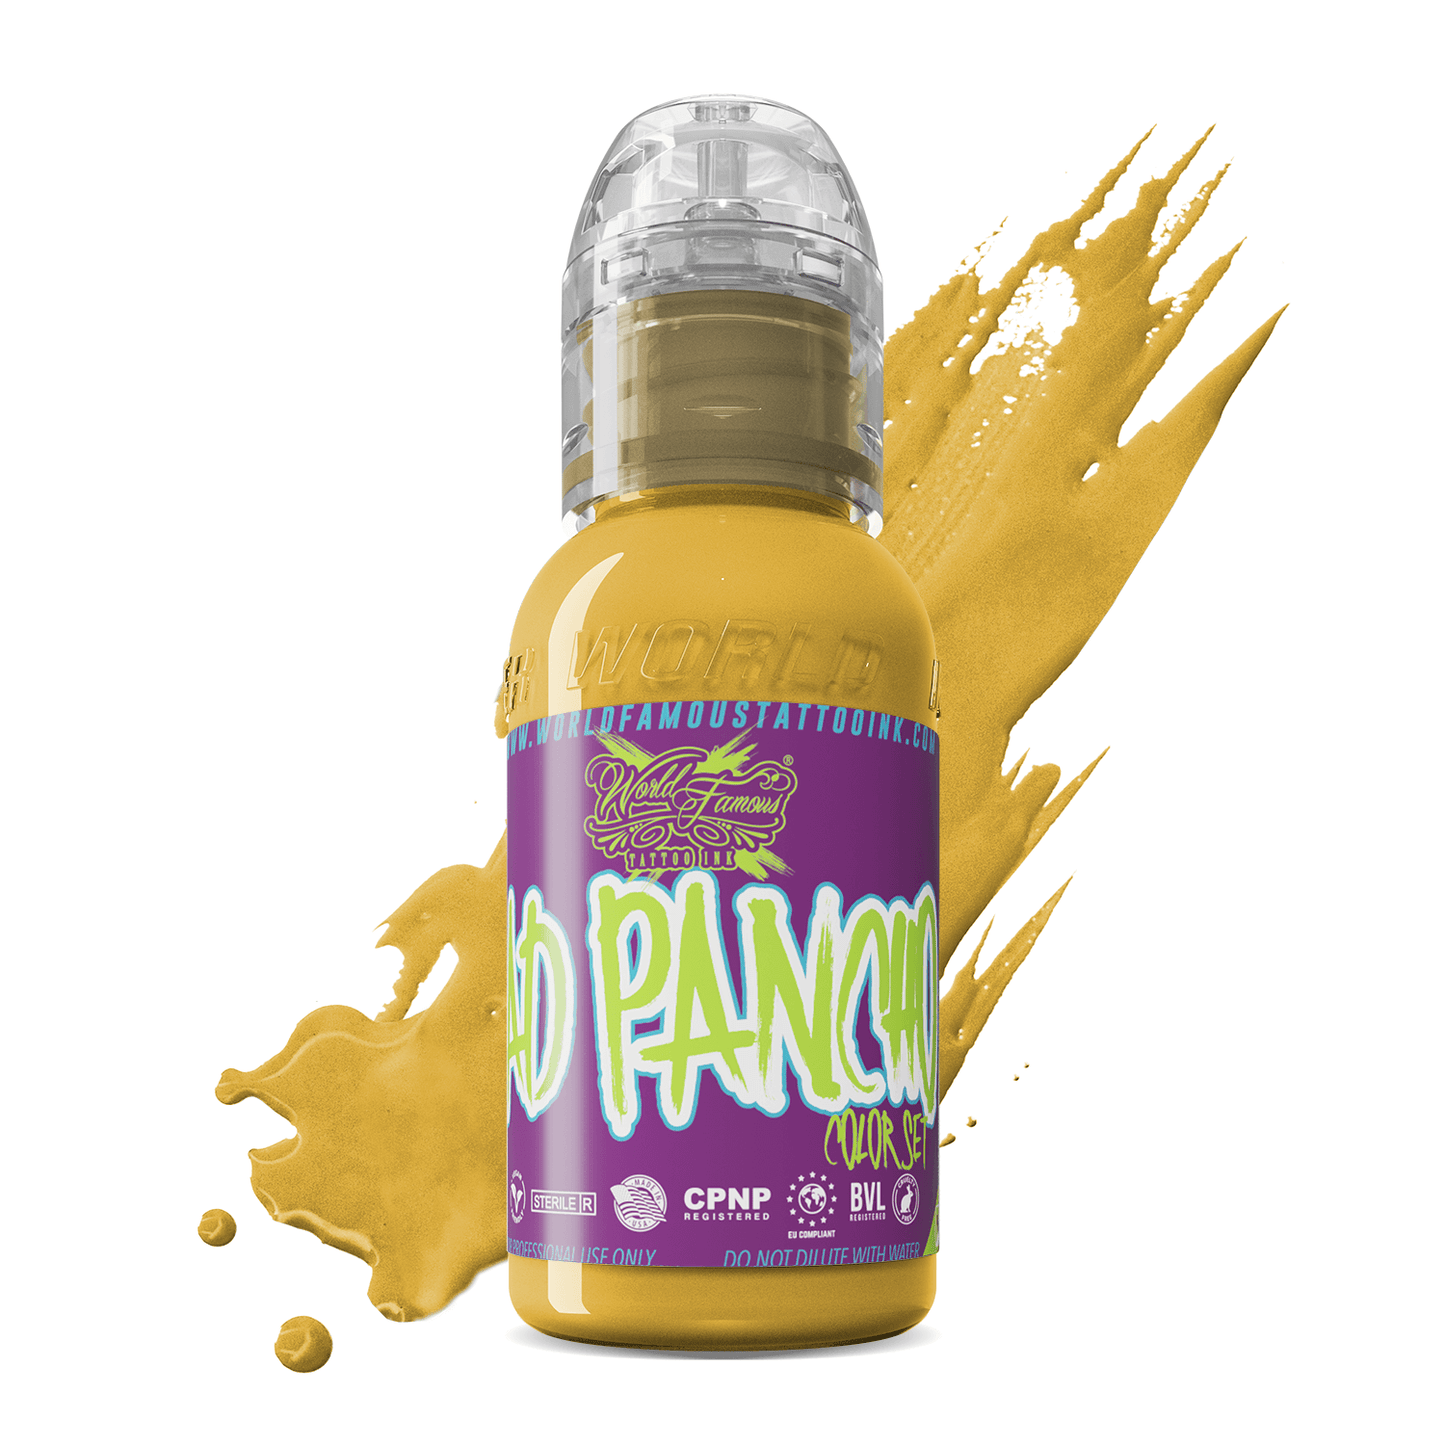 A.D. Pancho Proteam Color - Light Yellow | World Famous Tattoo Ink